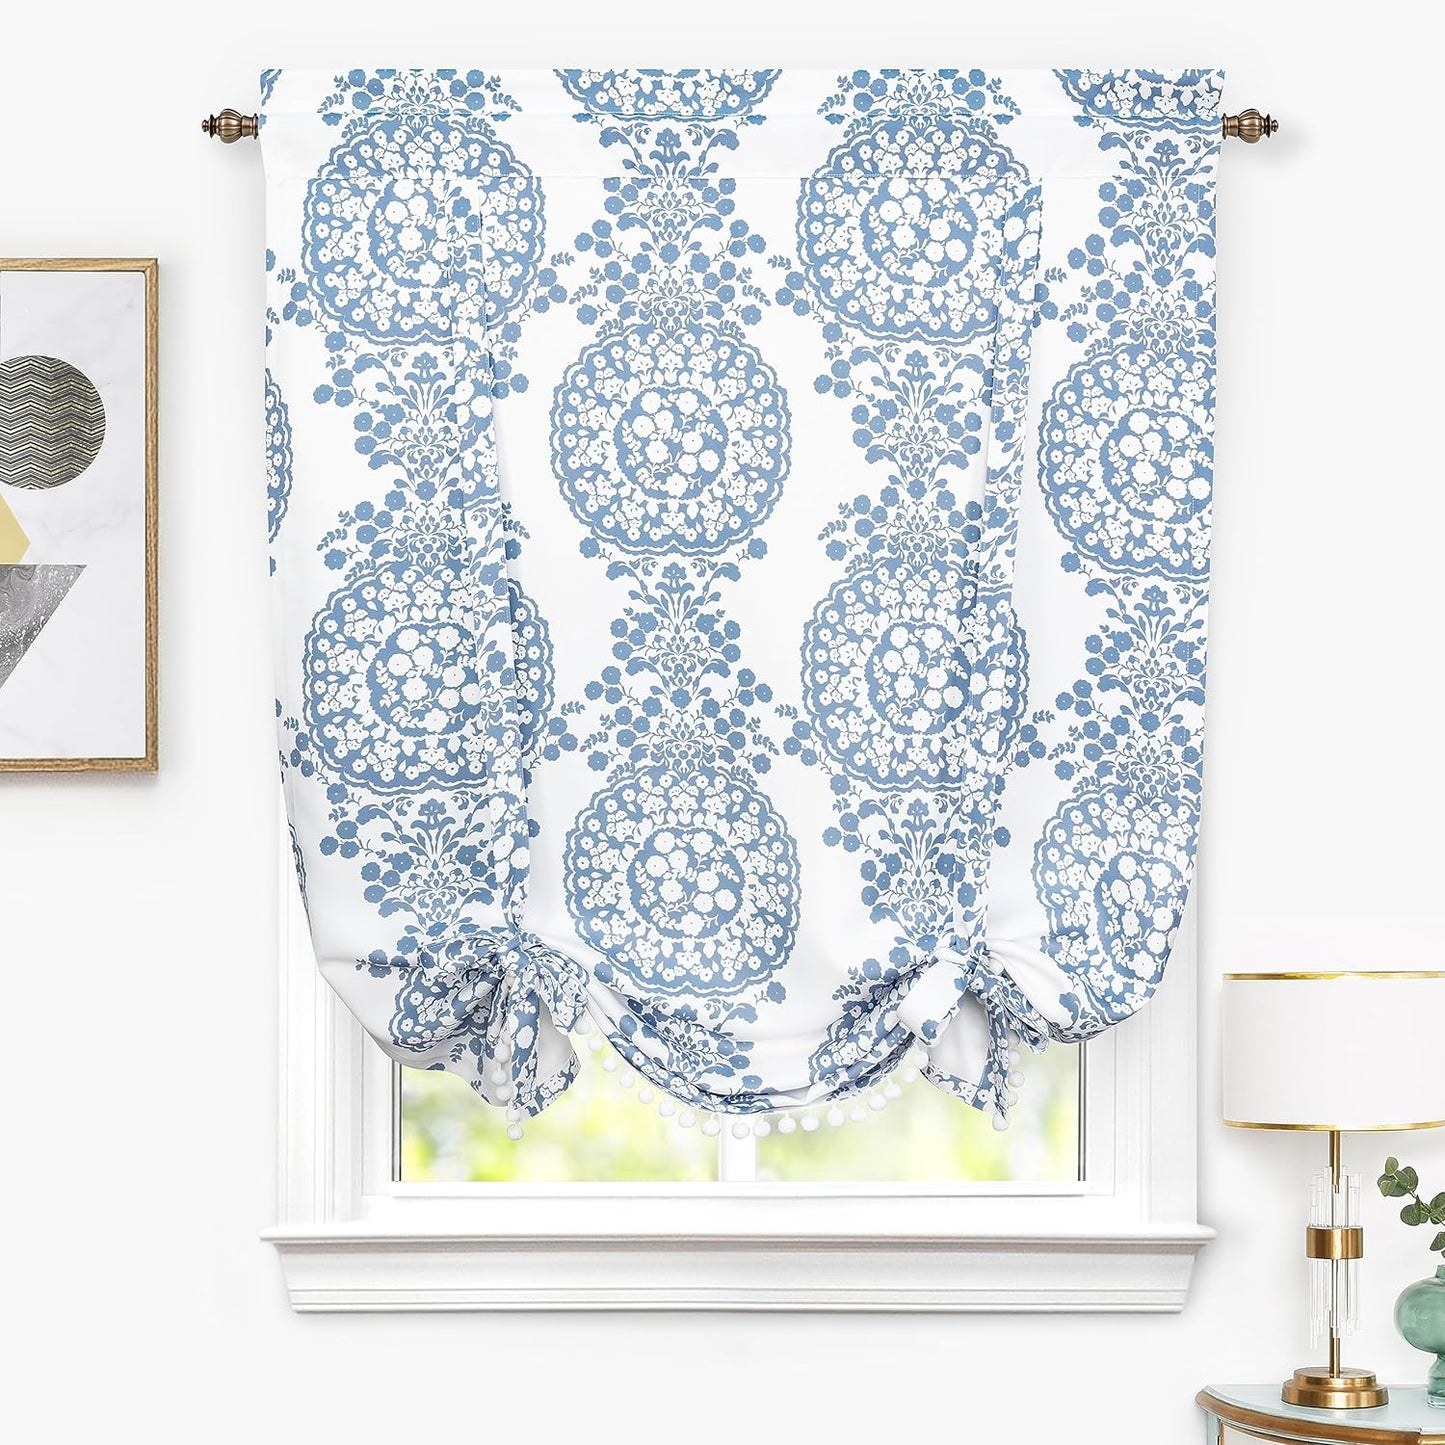 Driftaway Damask Curtains for Kitchen Bathroom Laundry Room Small Windows Floral Damask Medallion Patterned Adjustable Tie up Curtain Single 45 Inch by 63 Inch Dusty Blue  DriftAway Blue (8)45"X63" With Pom(Tie Up) 